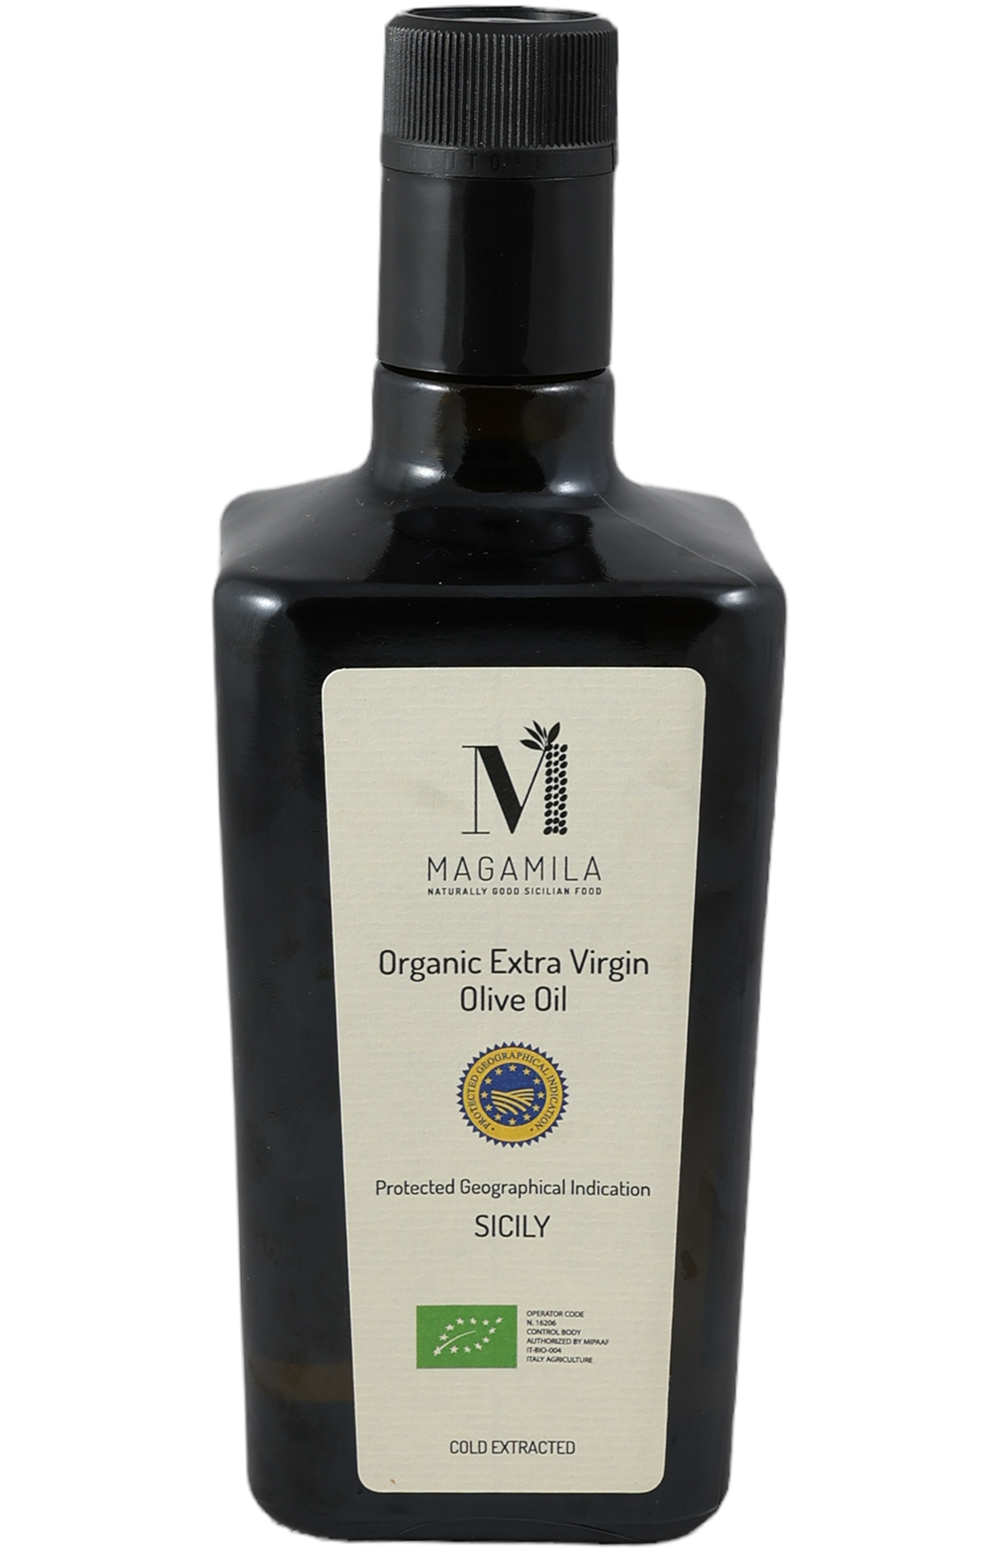 Magamila Organic Extra Virgin Olive Oil - Protected Geographic Indication